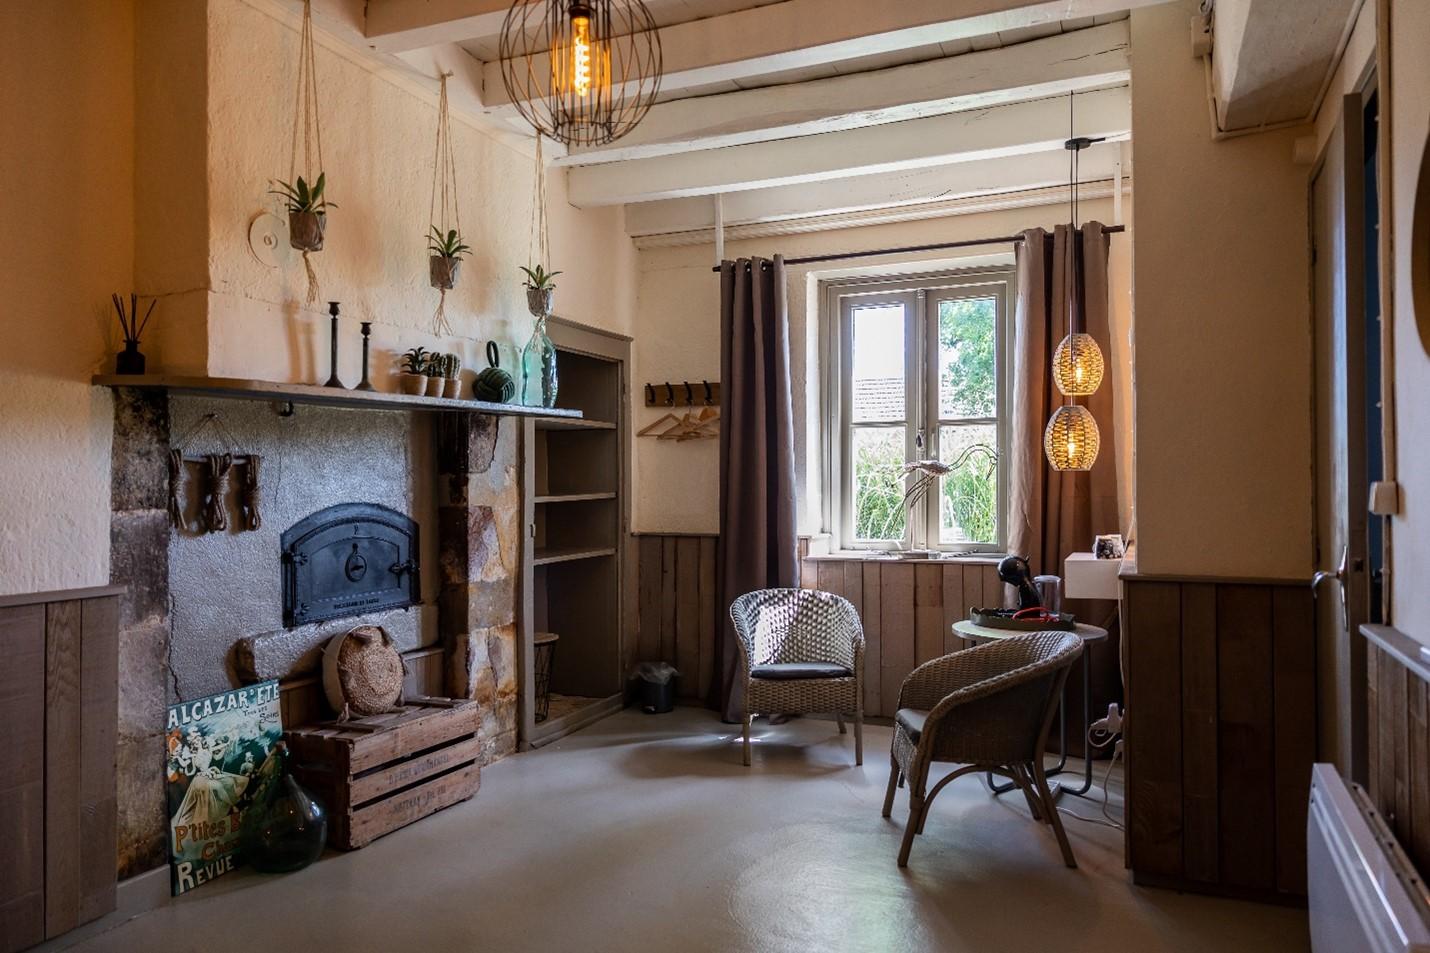 Relax in stylish Bed & Breakfast rooms in the Heart of France